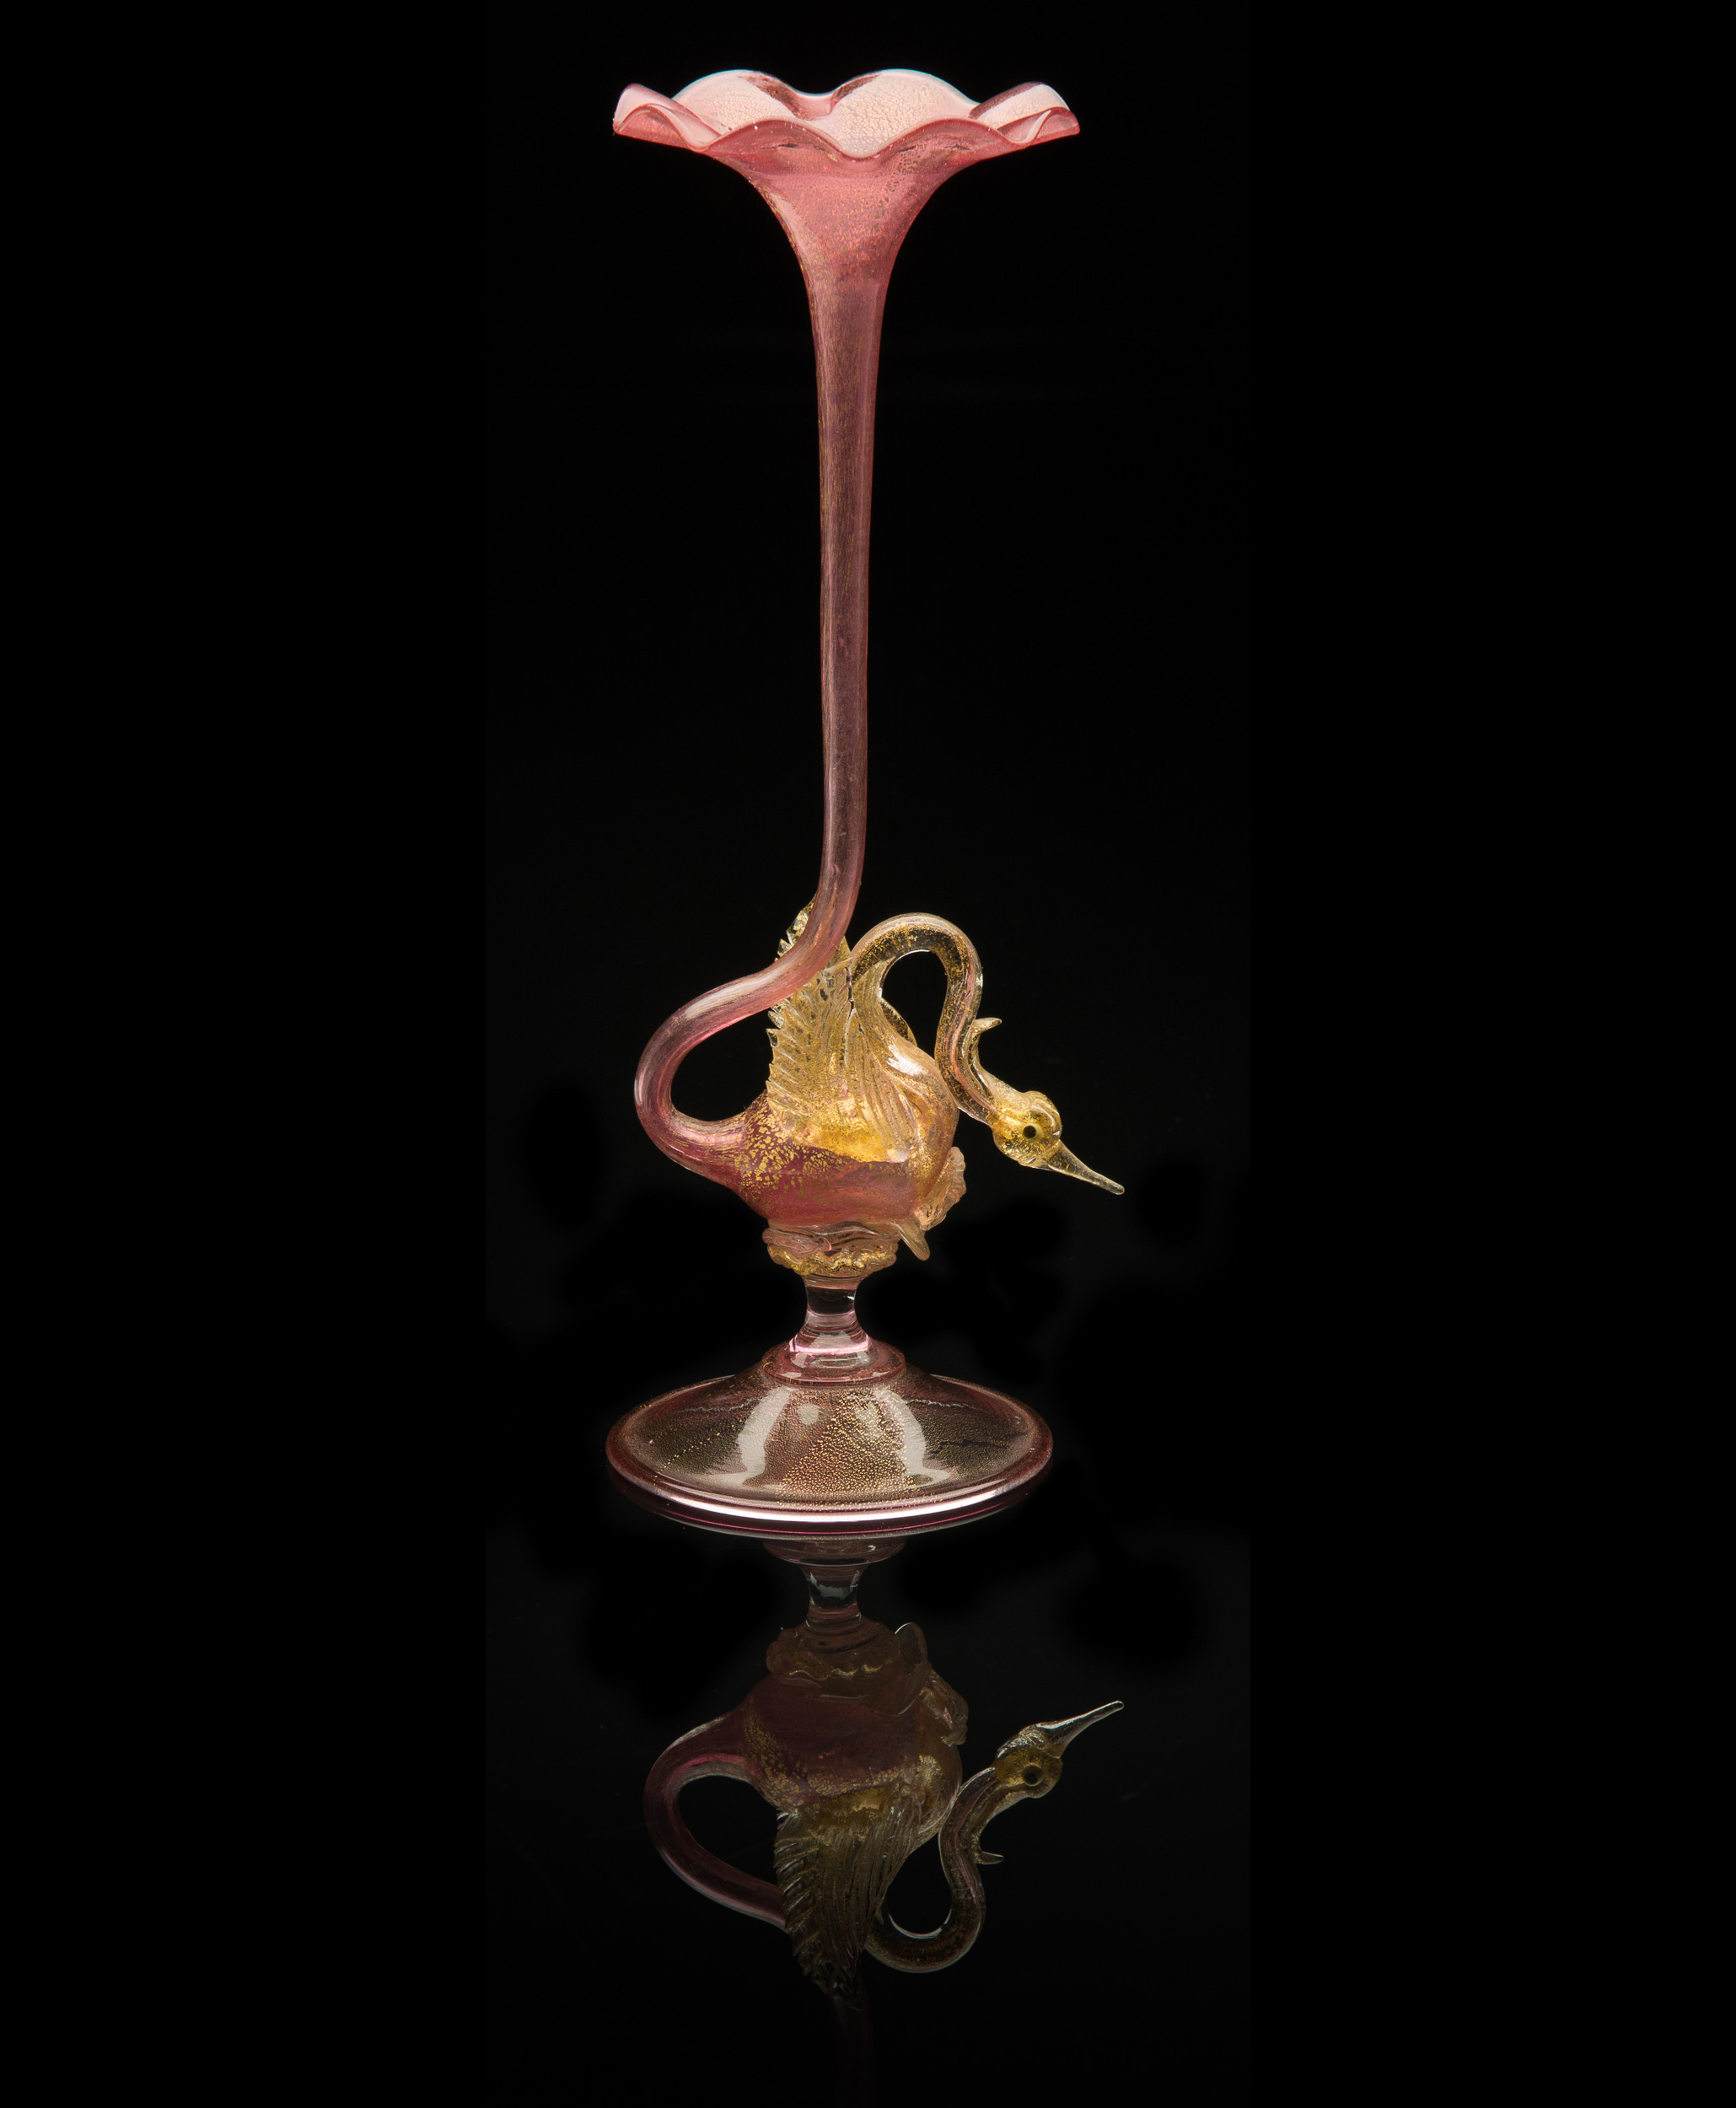  Unknown Venetian,&nbsp; Pink Bud Vase with Swan &nbsp;(circa 1900, glass, 10&nbsp;inches), VV.490 